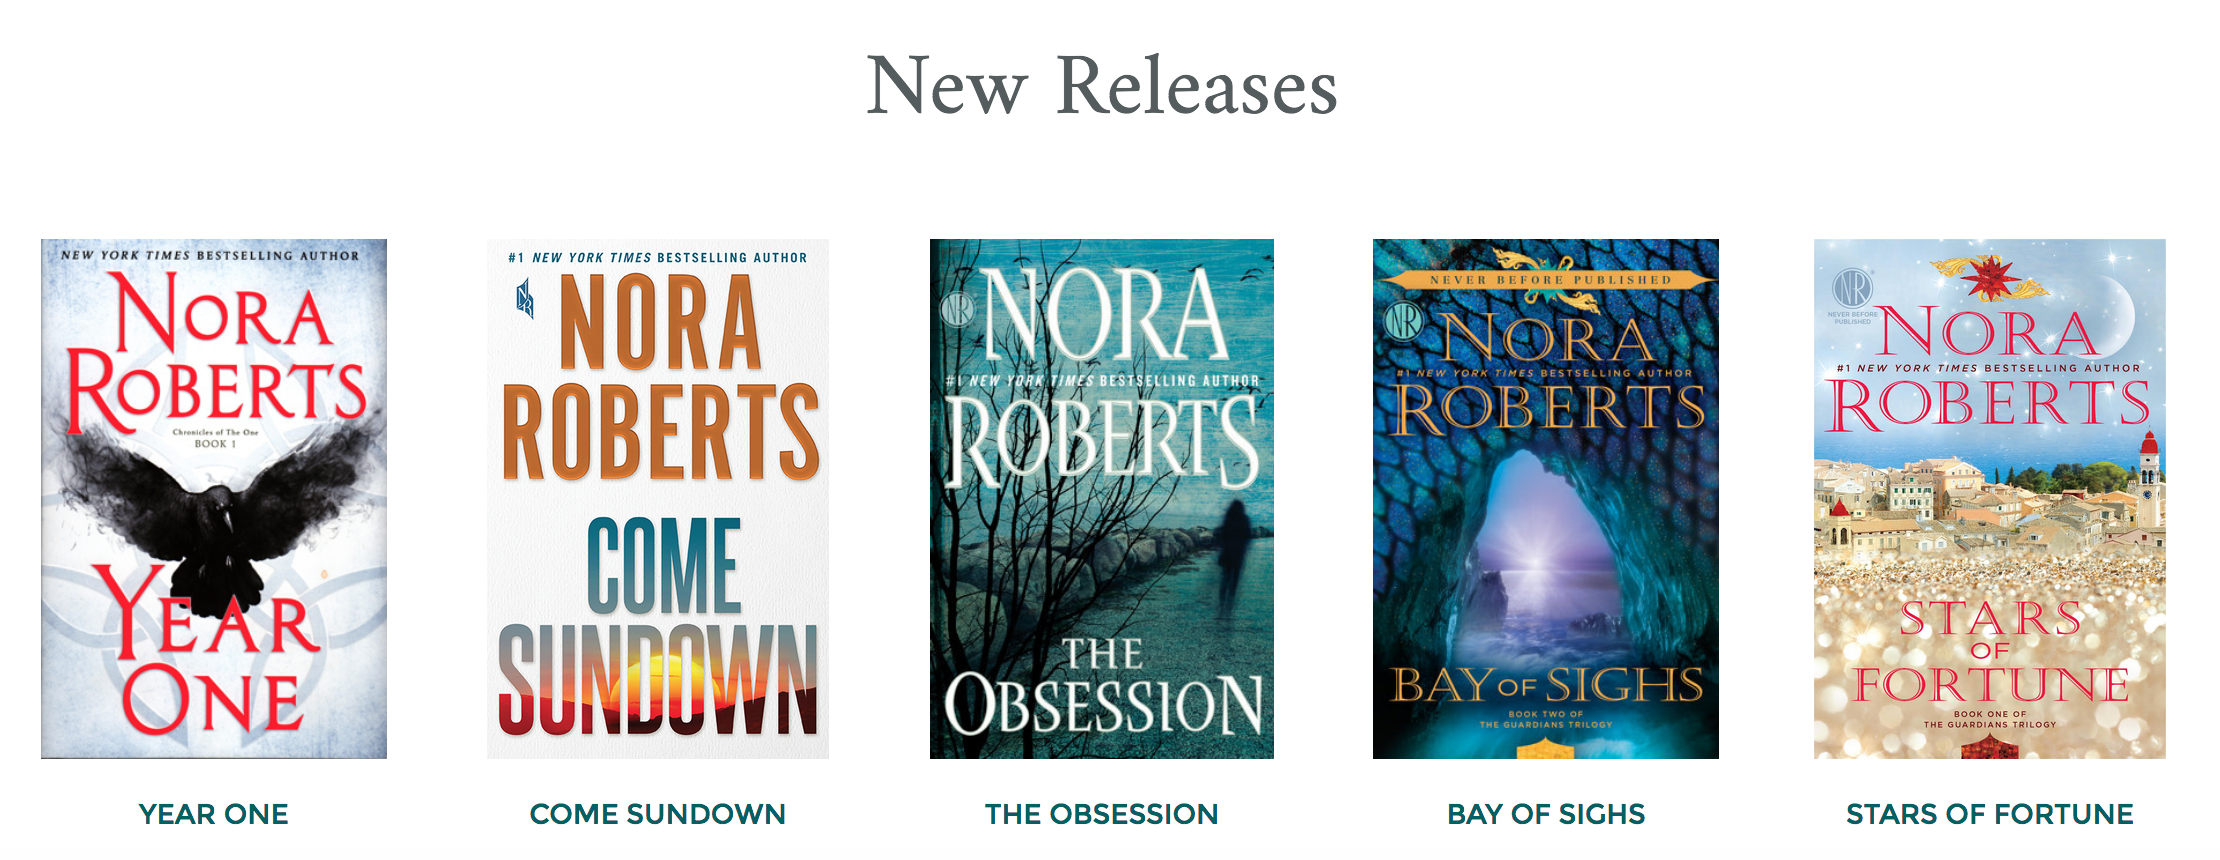 Nora Roberts New Releases